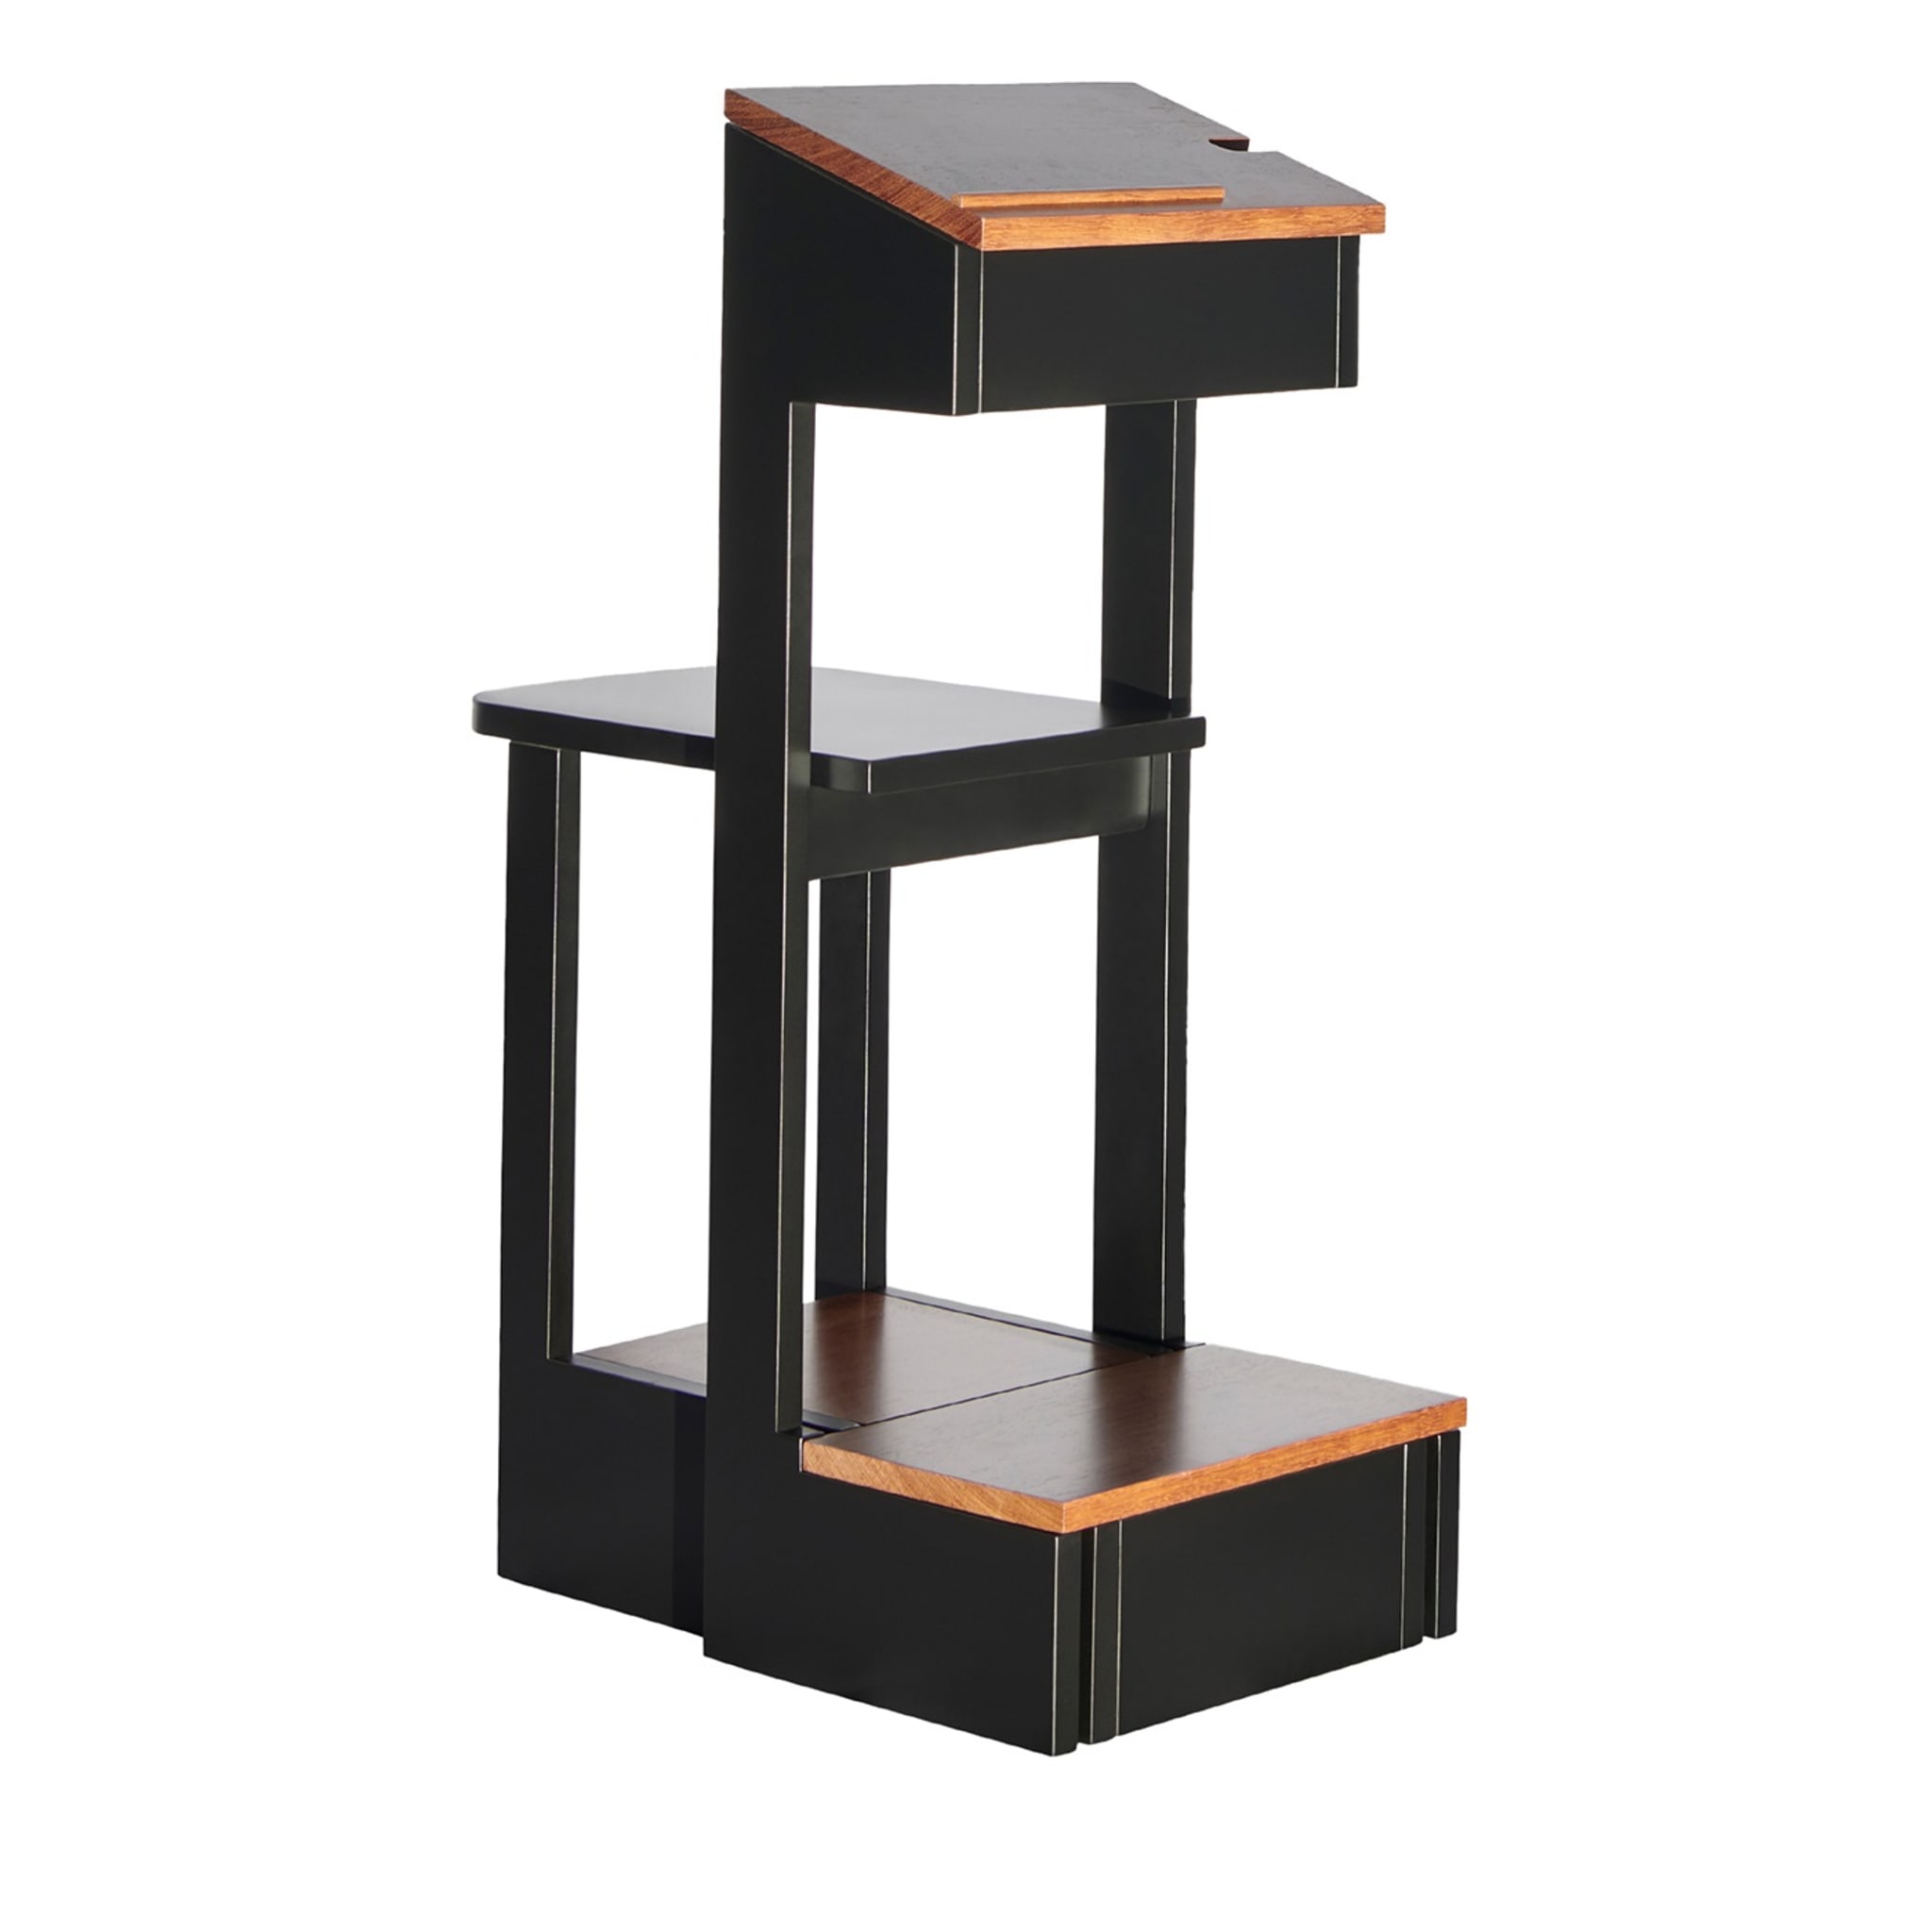 Trab A Multifunctional Unit Limited Edition by Standa - Alternative view 1